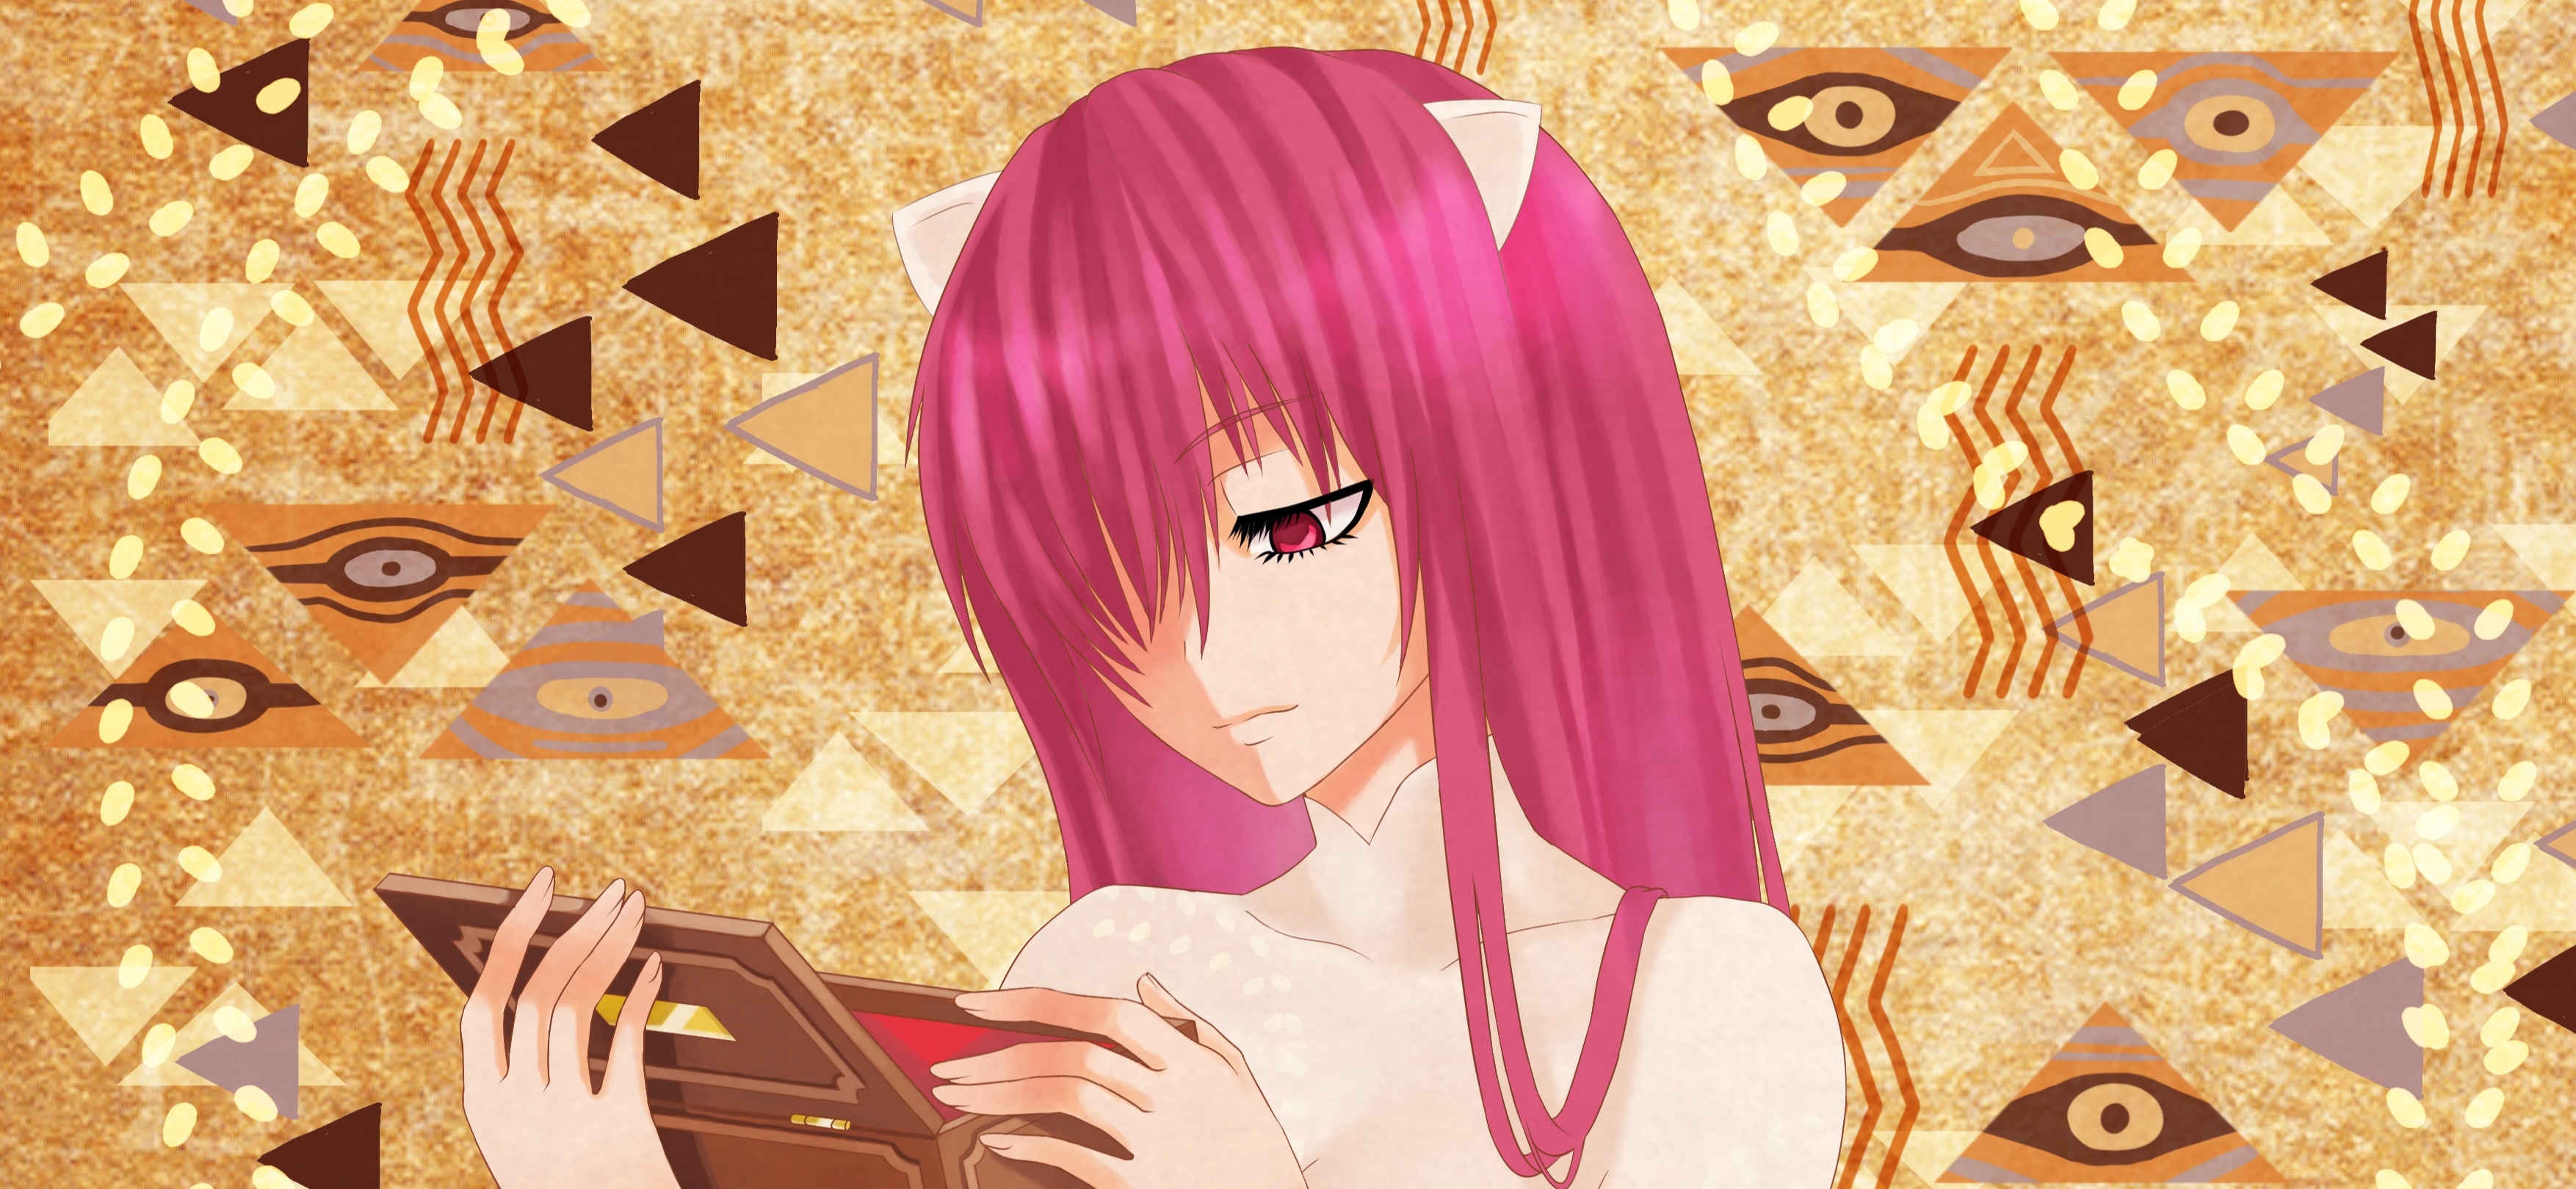 Elfen Lied, Lucy the character, Wallpaper resolution, Captivating image, 3510x1620 Dual Screen Desktop